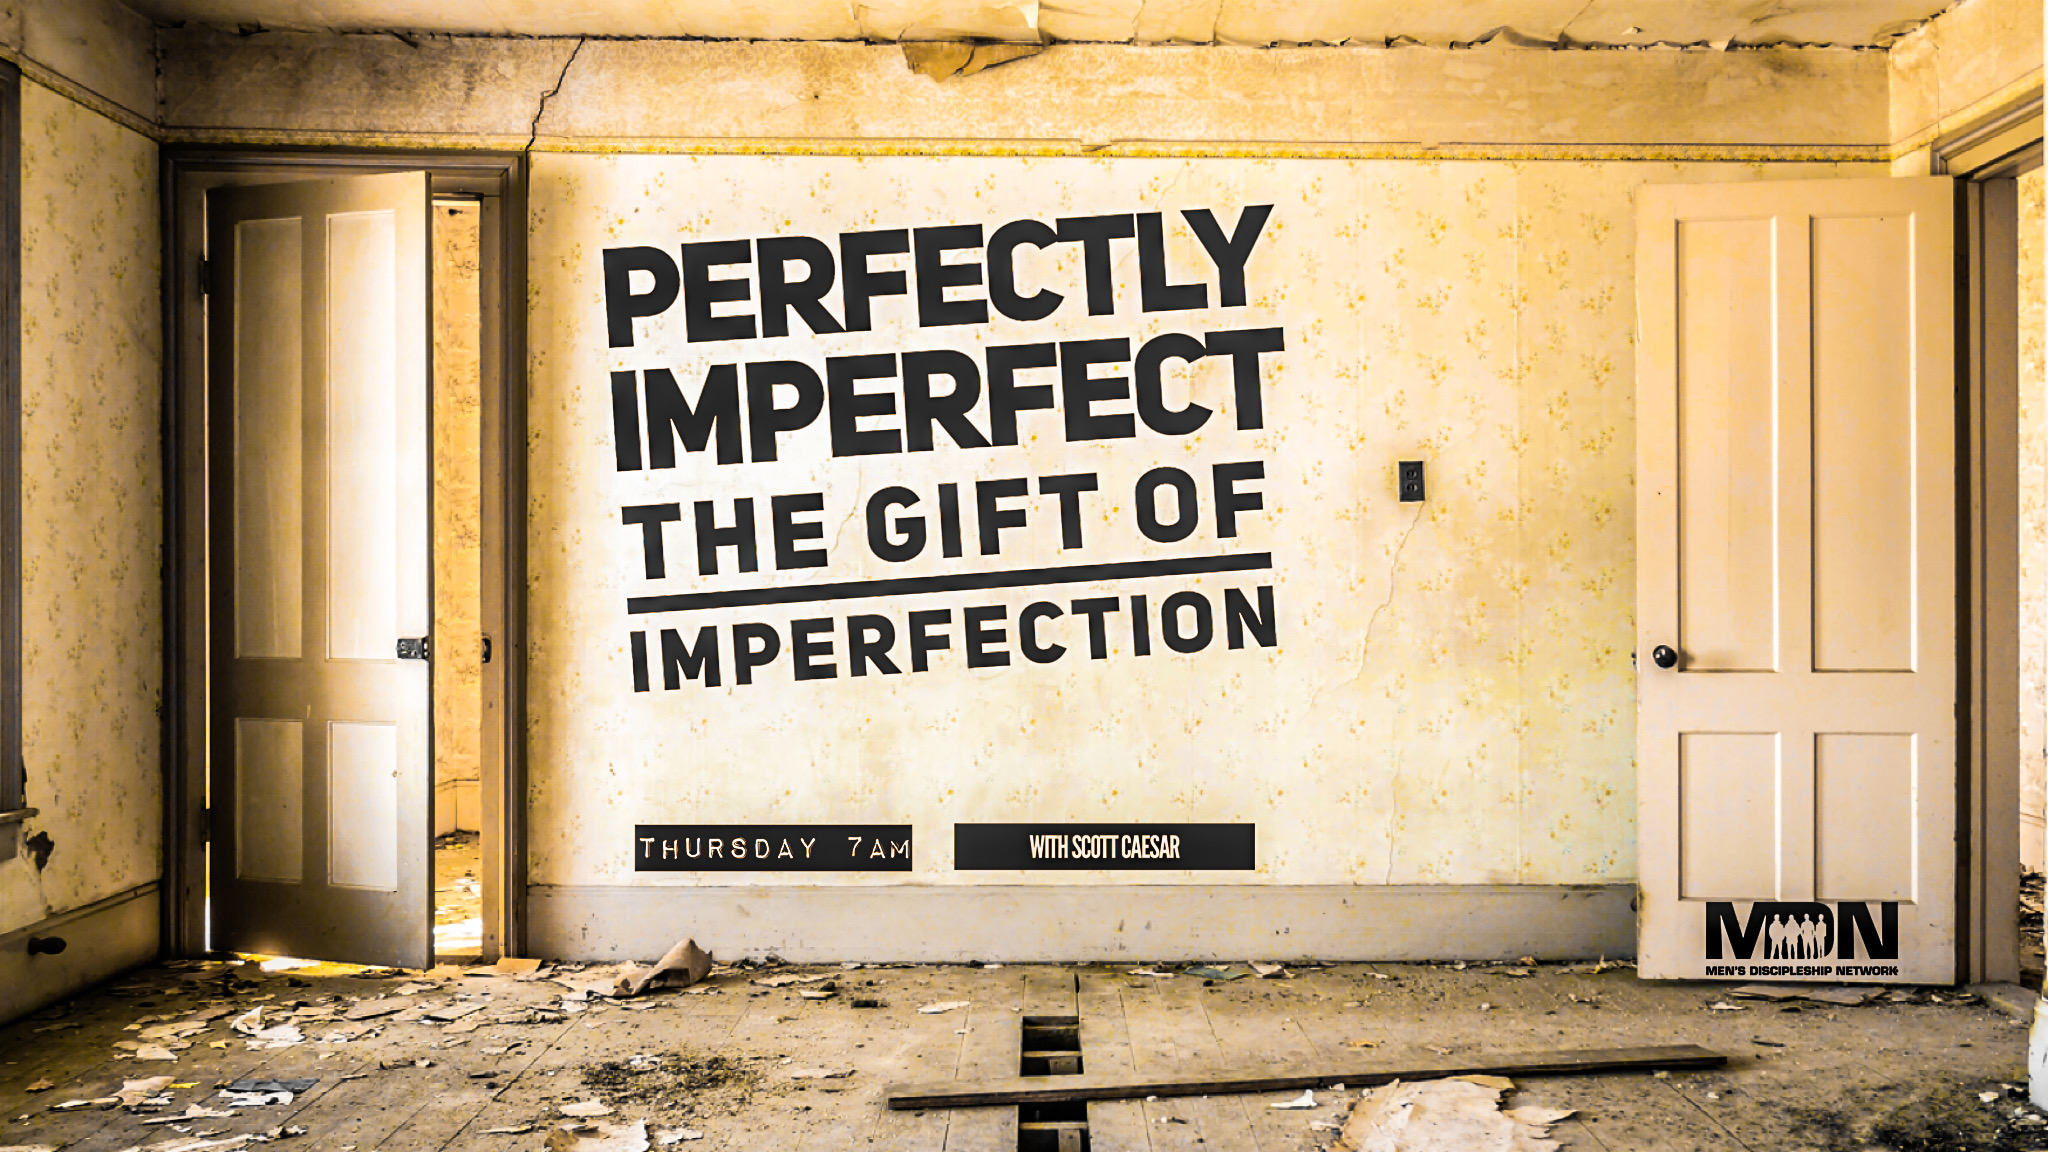 Perfectly Imperfect – The Gift of Imperfection